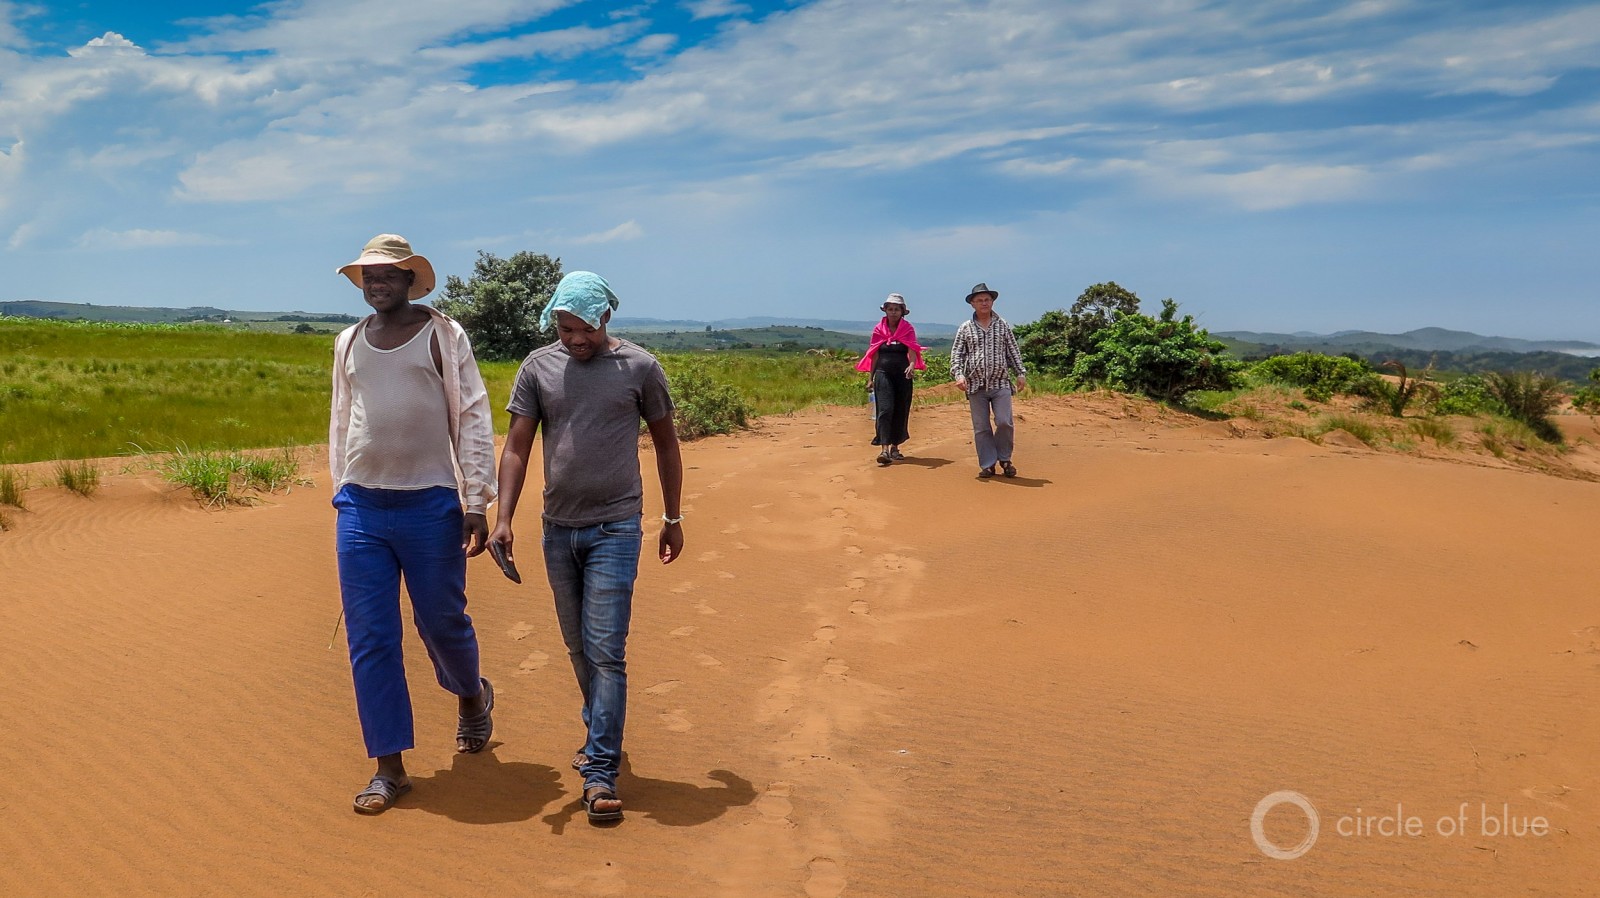 Three leaders of the Amadiba Crisis Committee, which has opposed beach mining and a new national highway since the group’s founding in 2007, tour the area of the proposed mine in January. From left to right they are Zwelidumile Yalo, Mzamo Dlamini and Nonhle Mbuthuma. Dick Forslund, far right, is Mbuthuma's husband. Photo © Keith Schneider / Circle of Blue